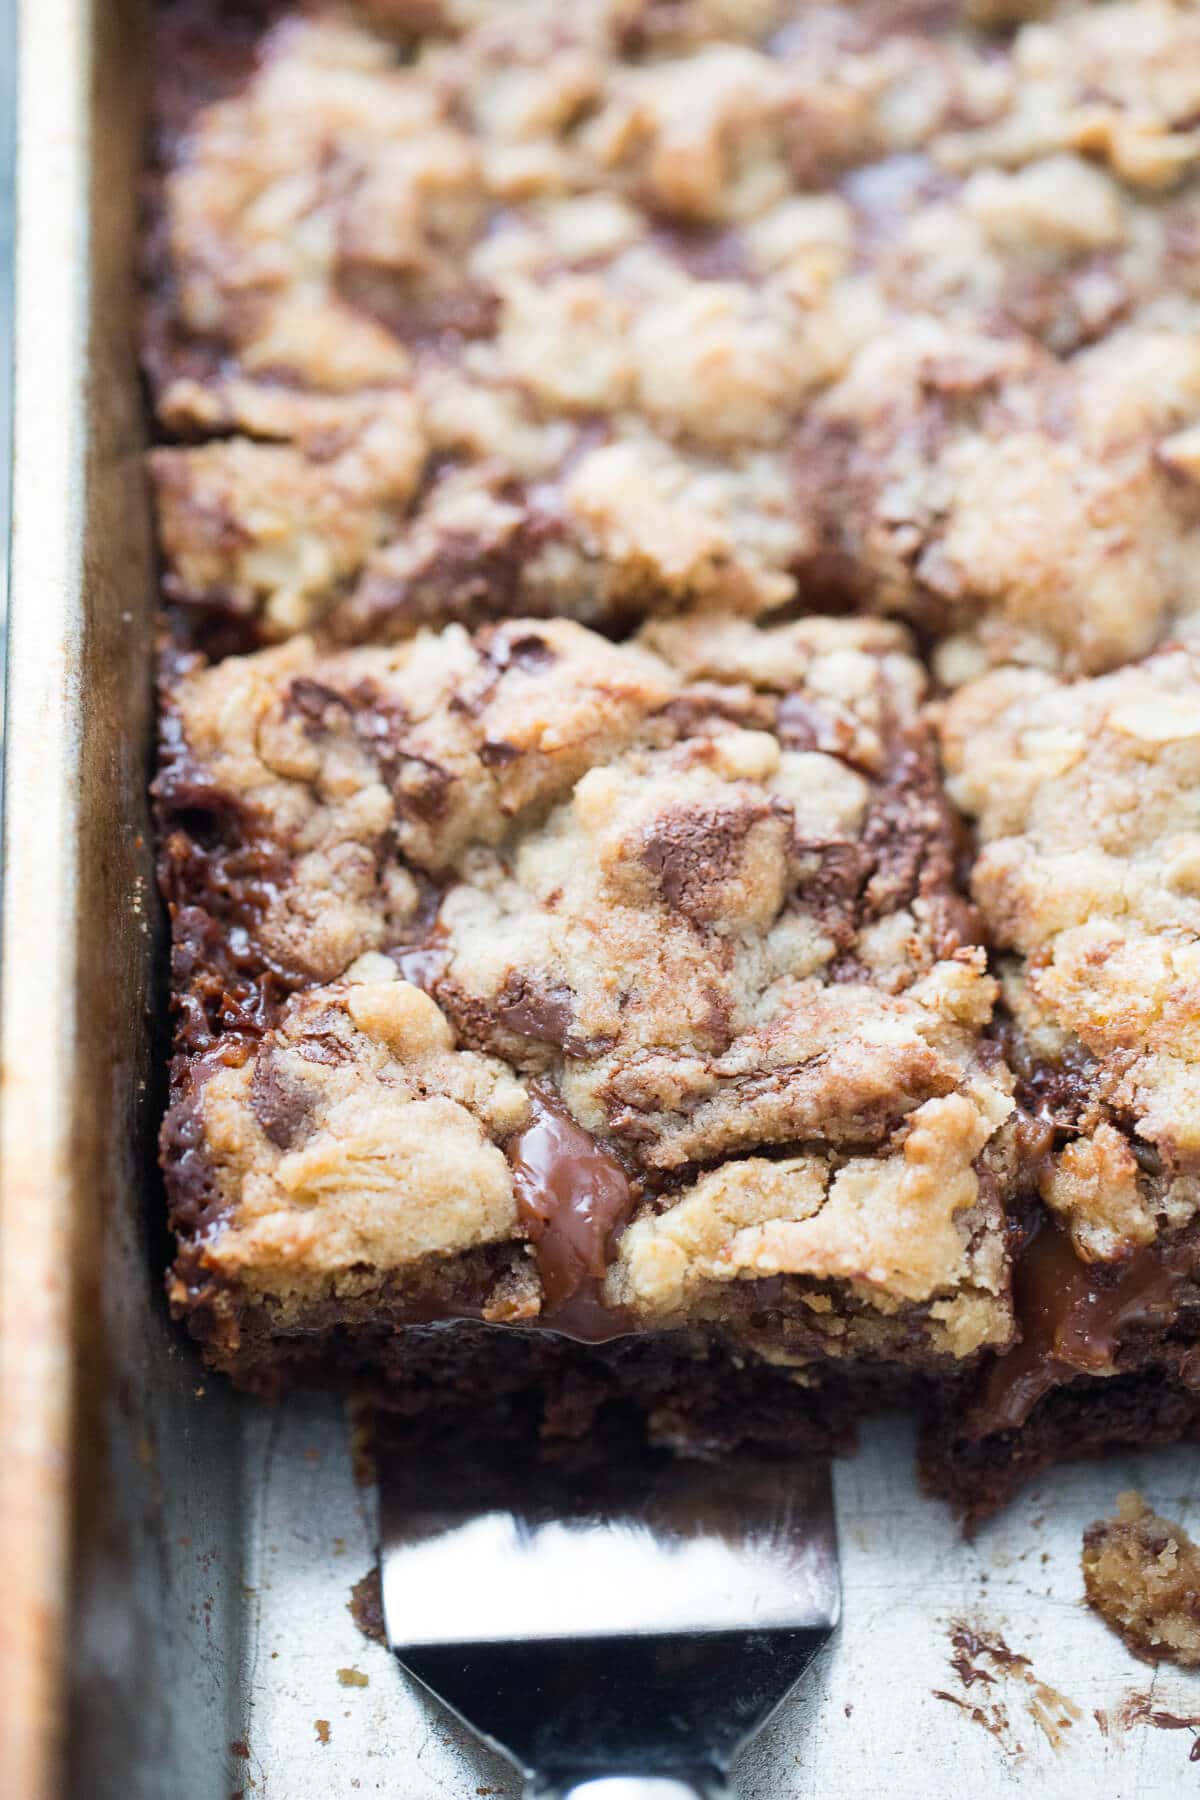 Brookie bars have a little bit of everything; brownies, cookies and creamy caramel!